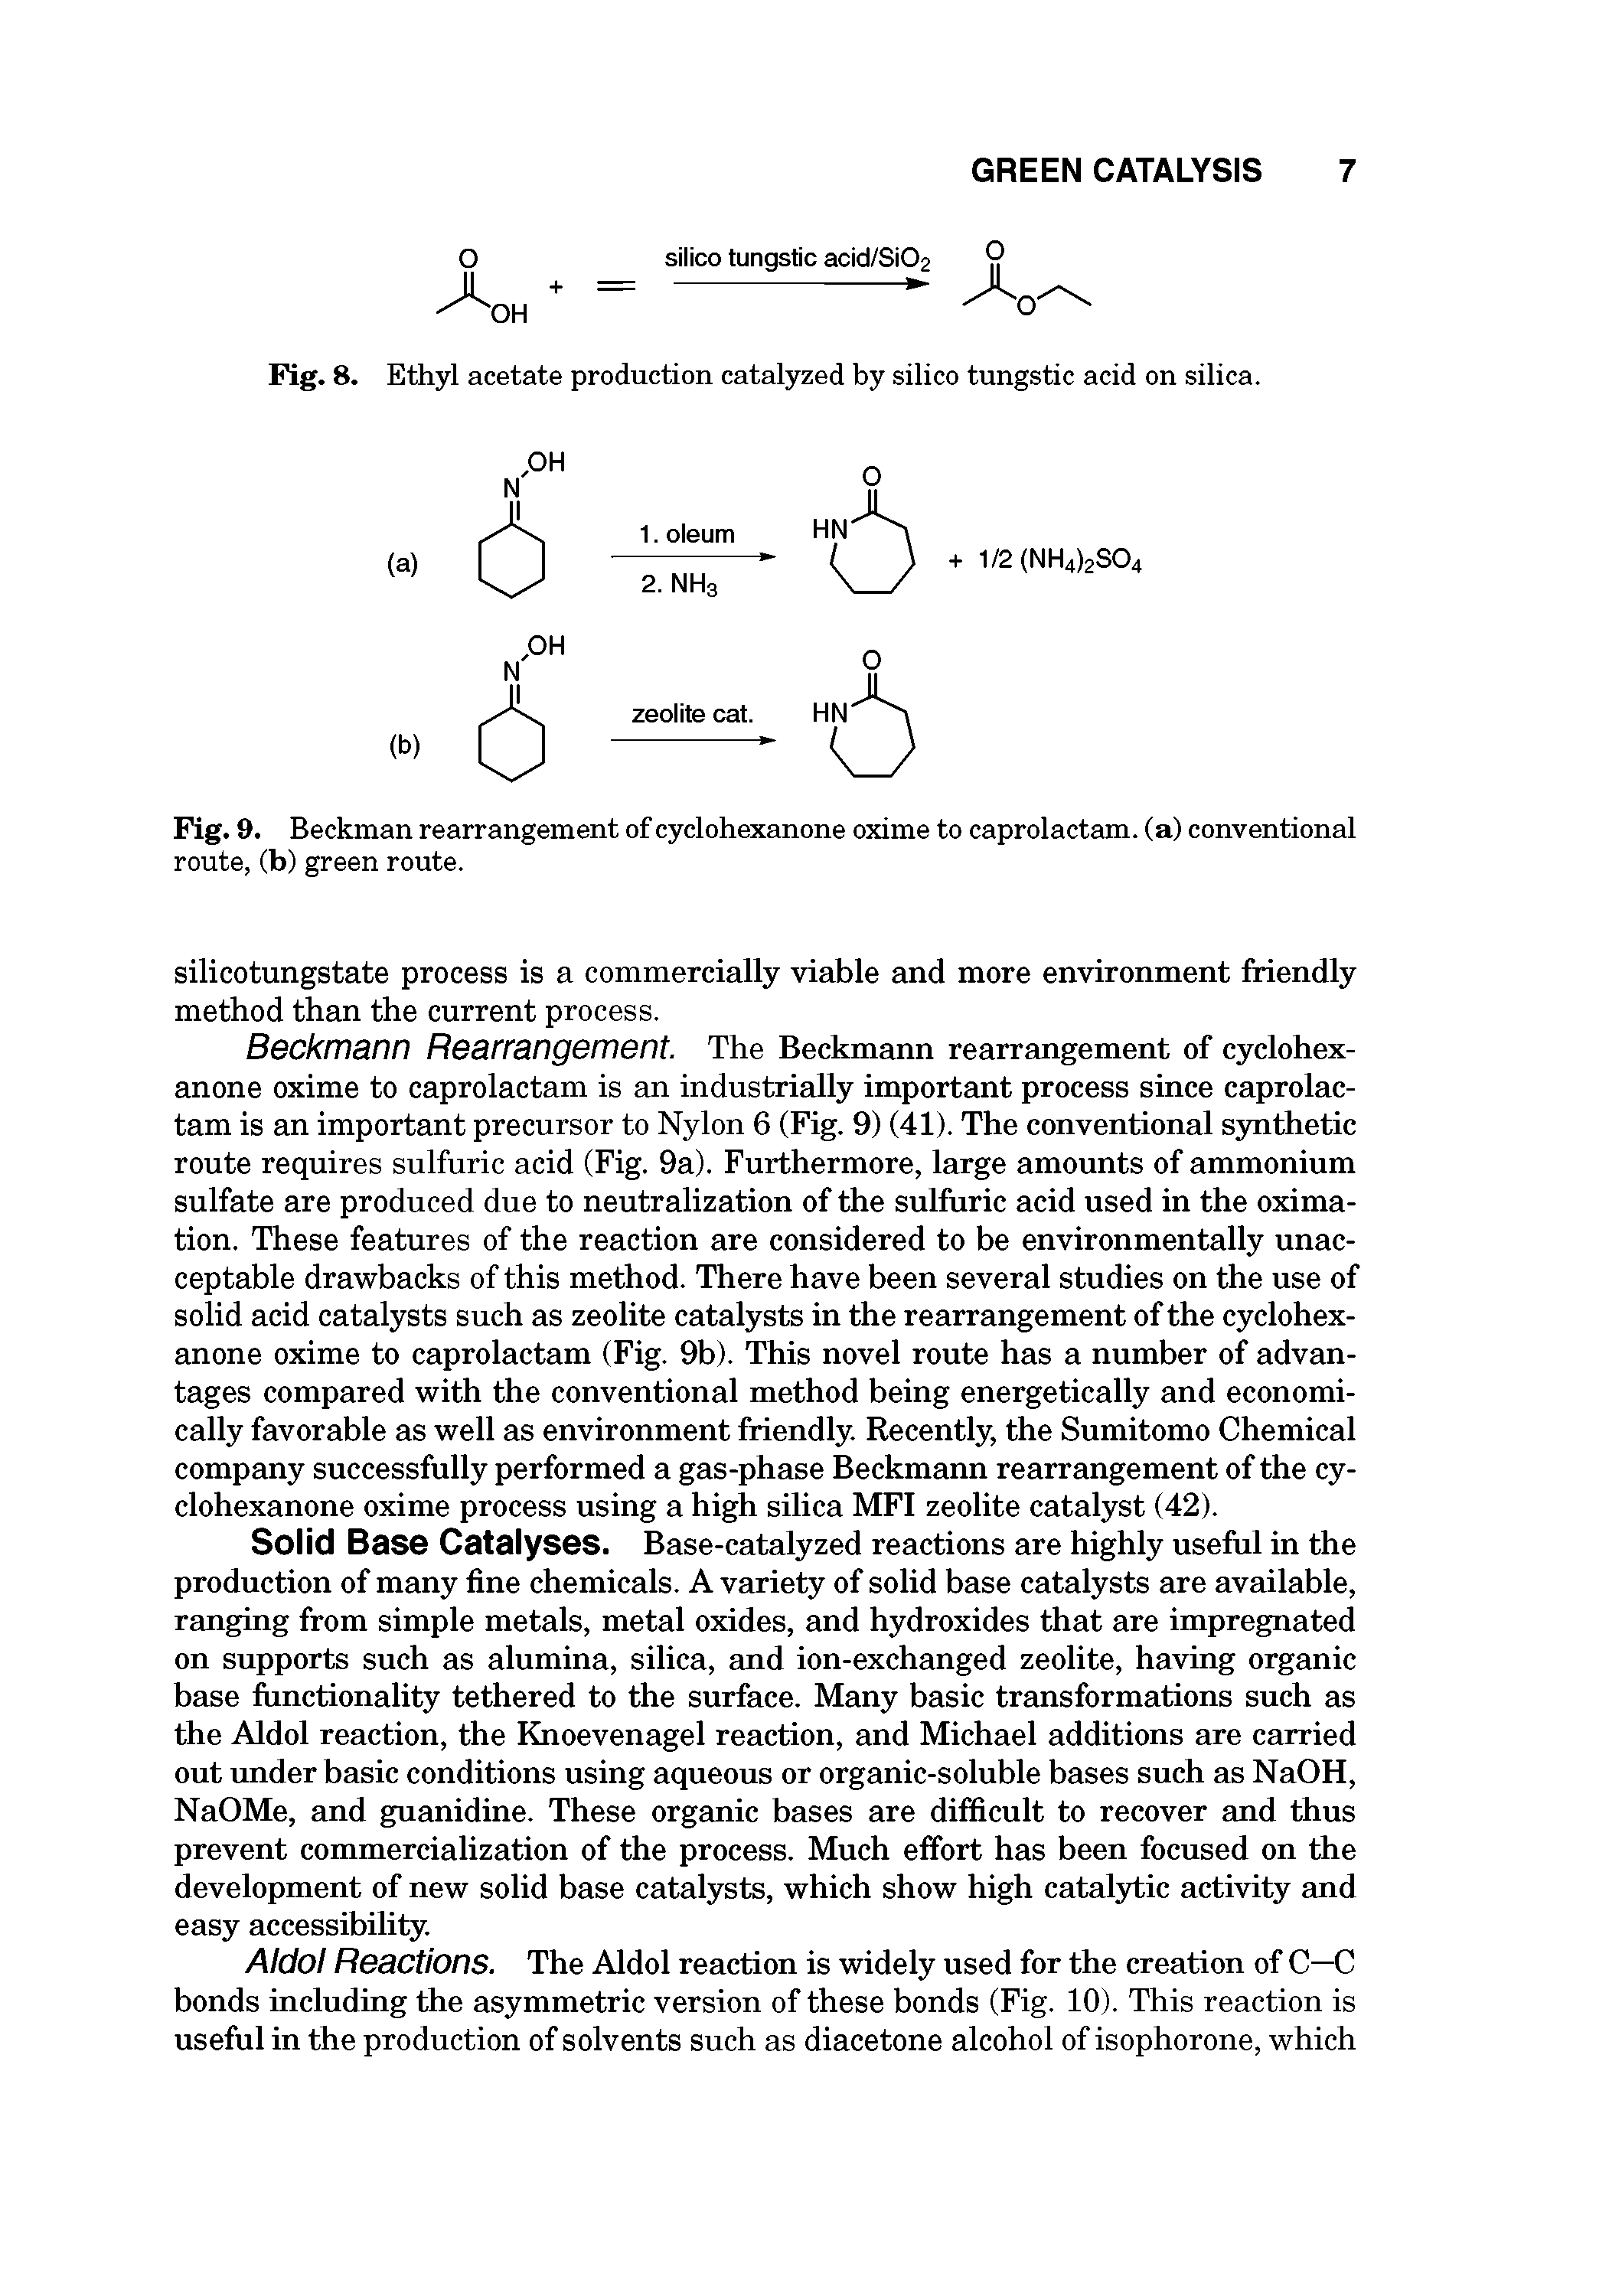 Fig. 8. Ethyl acetate production catalyzed by silico tungstic acid on silica.